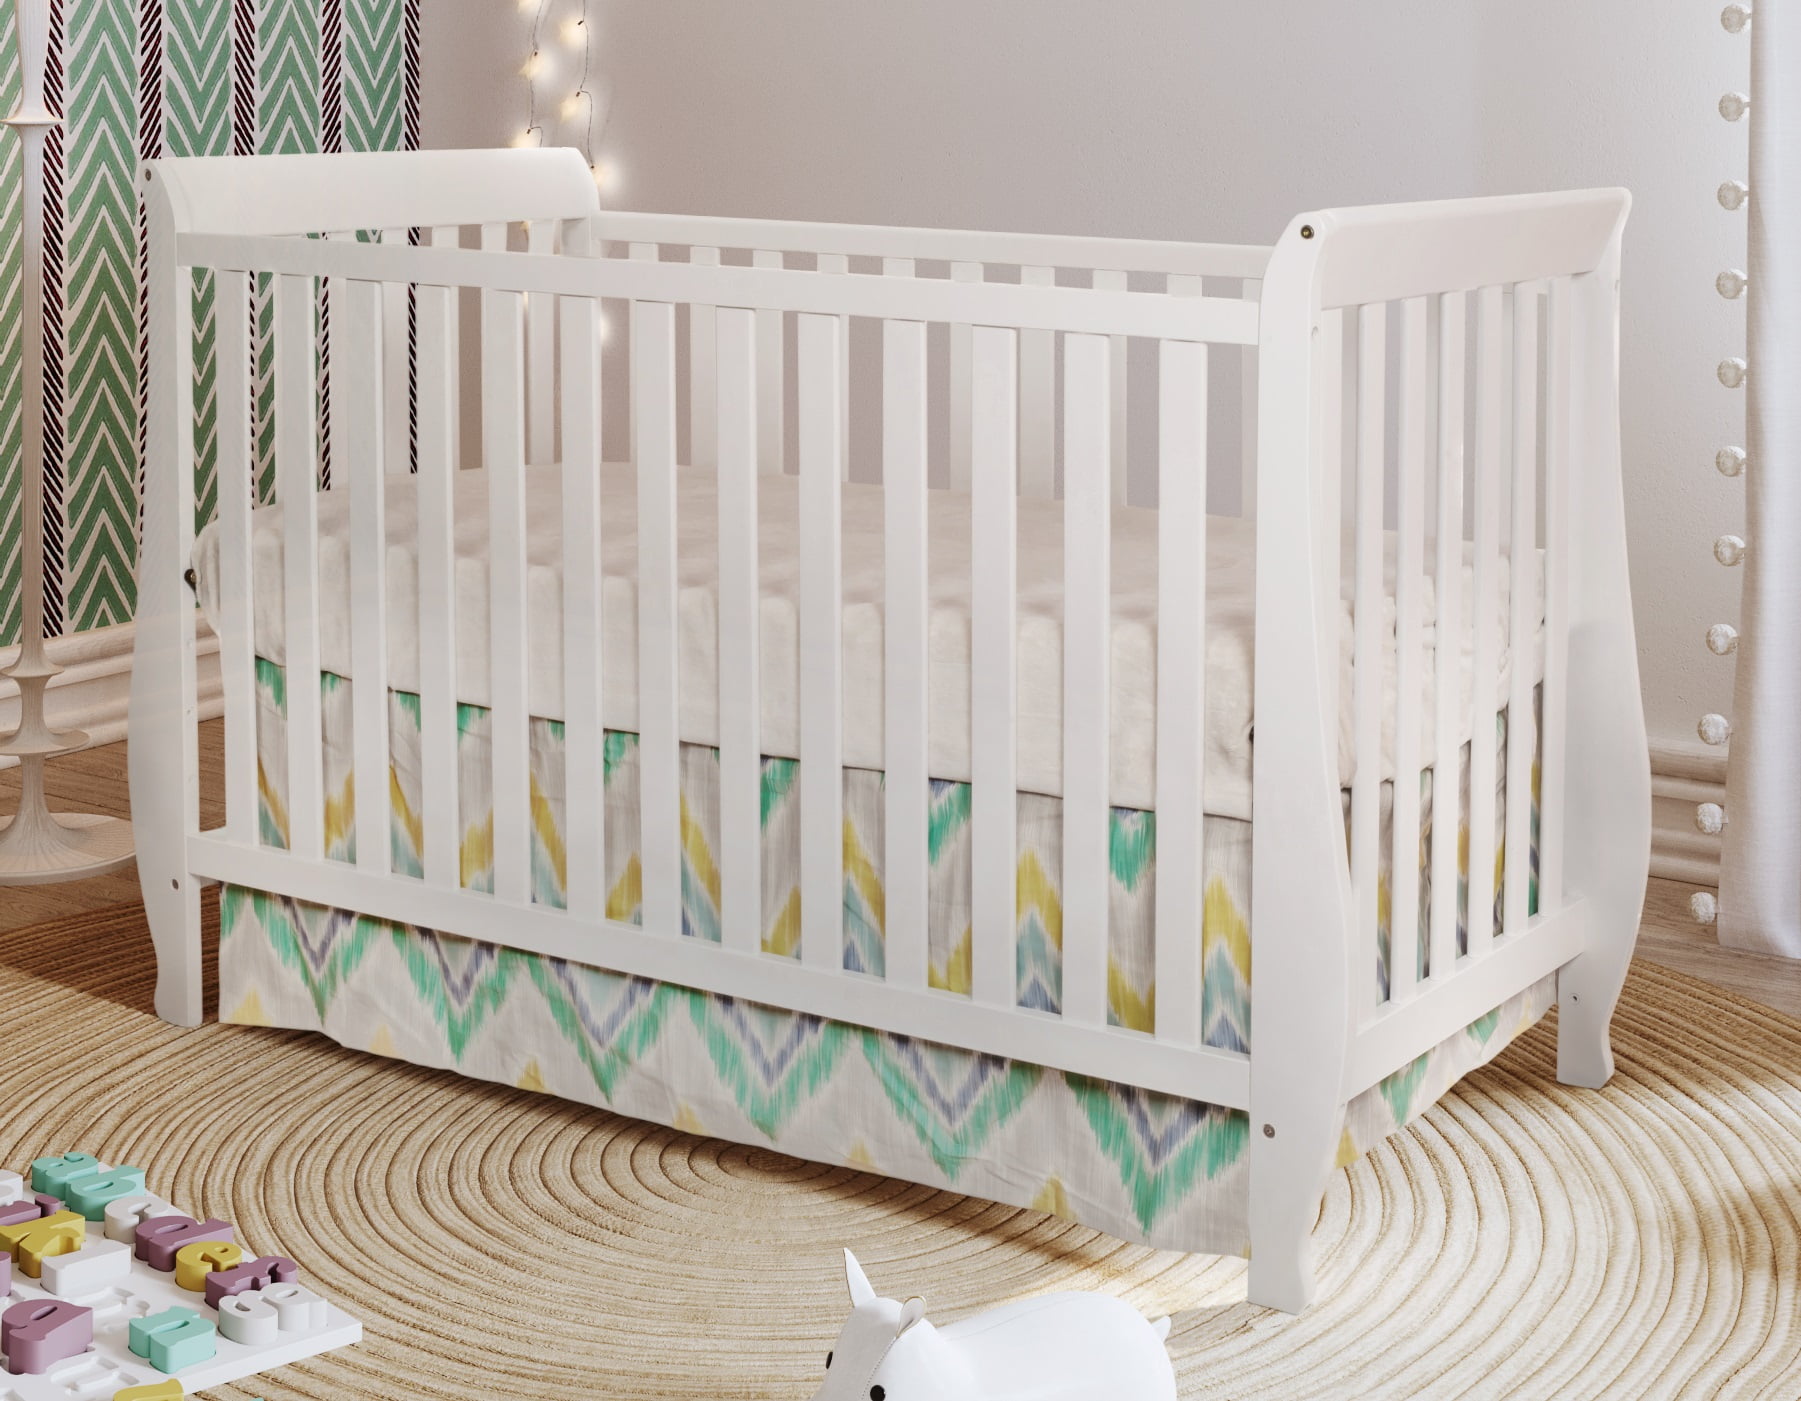 AFG Baby Naomi 4-in-1 Convertible Crib with Toddler Rail Cherry - image 5 of 5